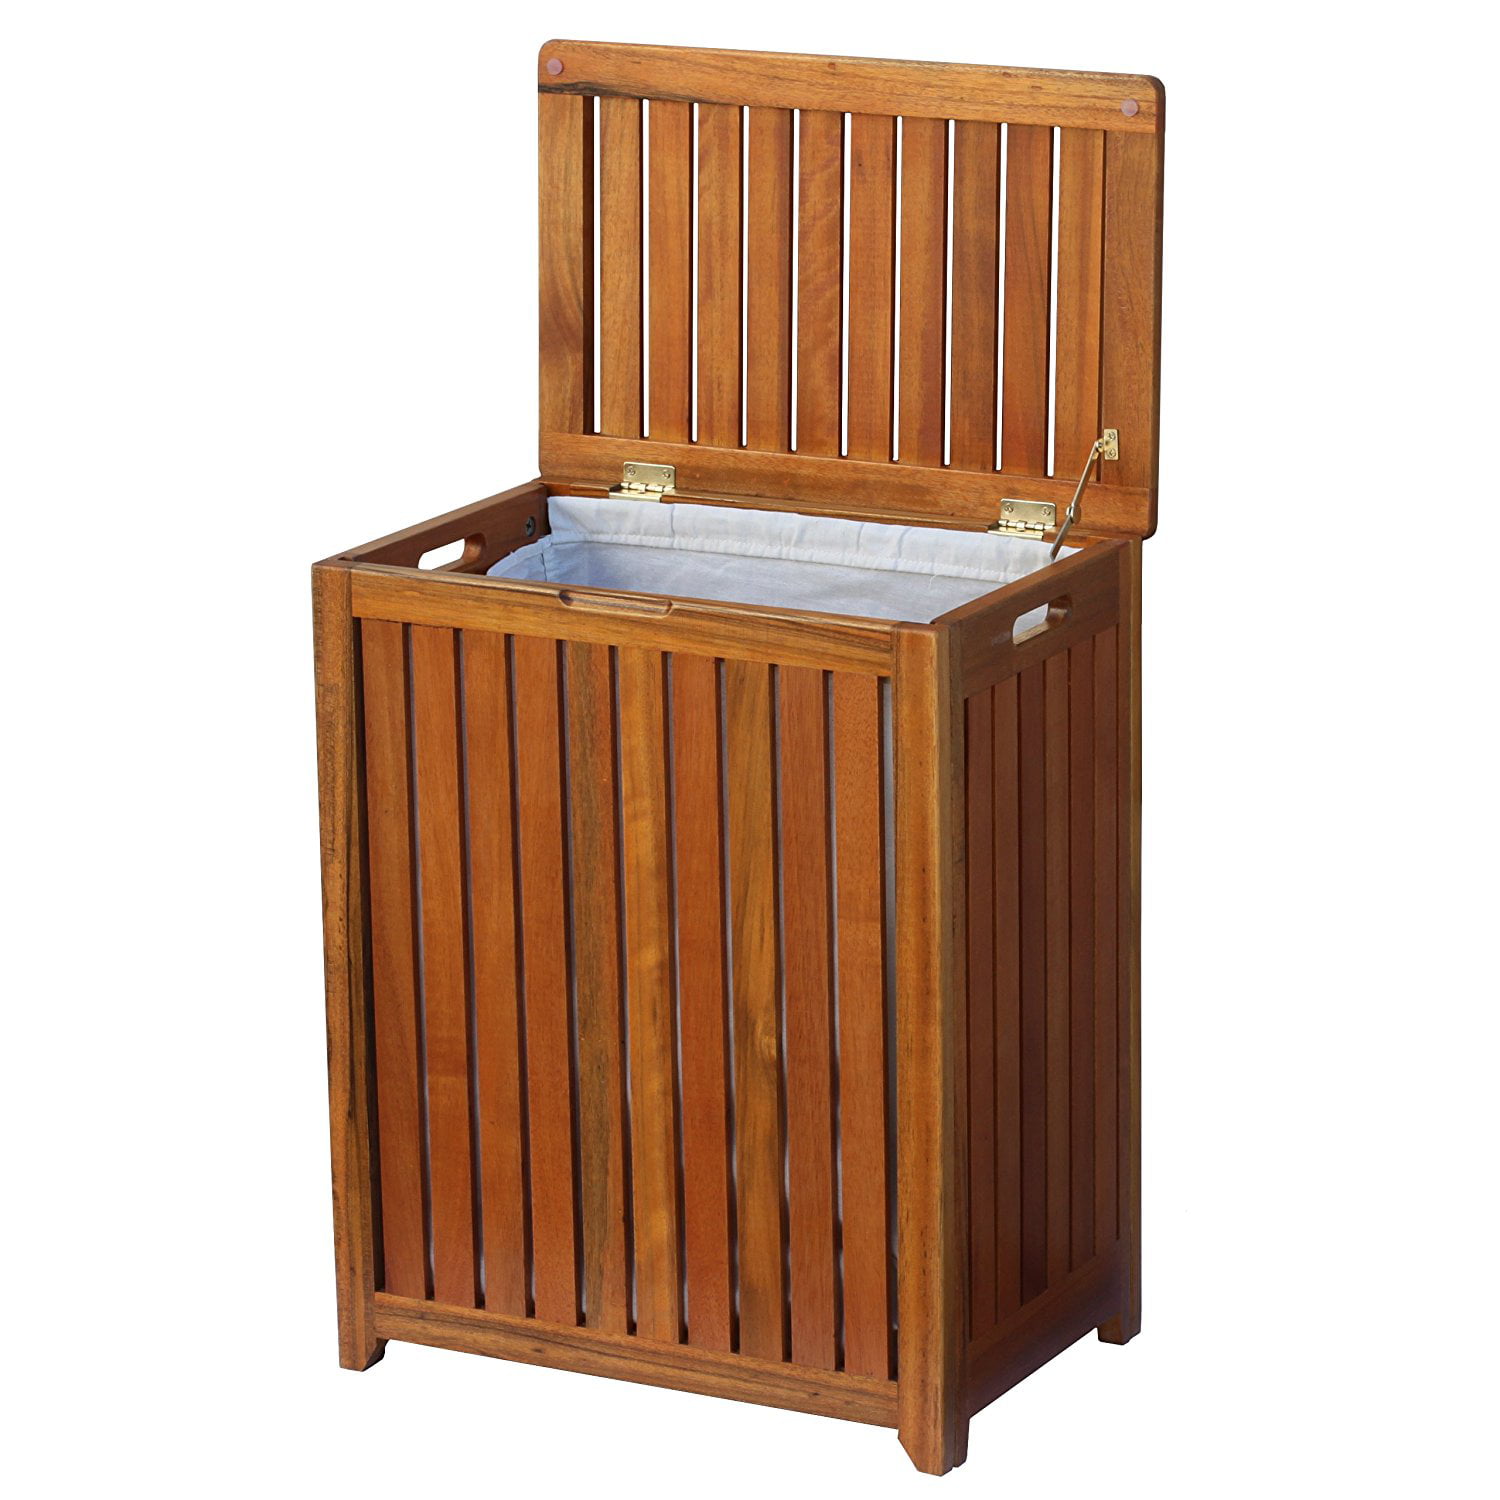 Featured image of post Bamboo Laundry Basket Online India / Shop laundry baskets online at paytmmall.com.